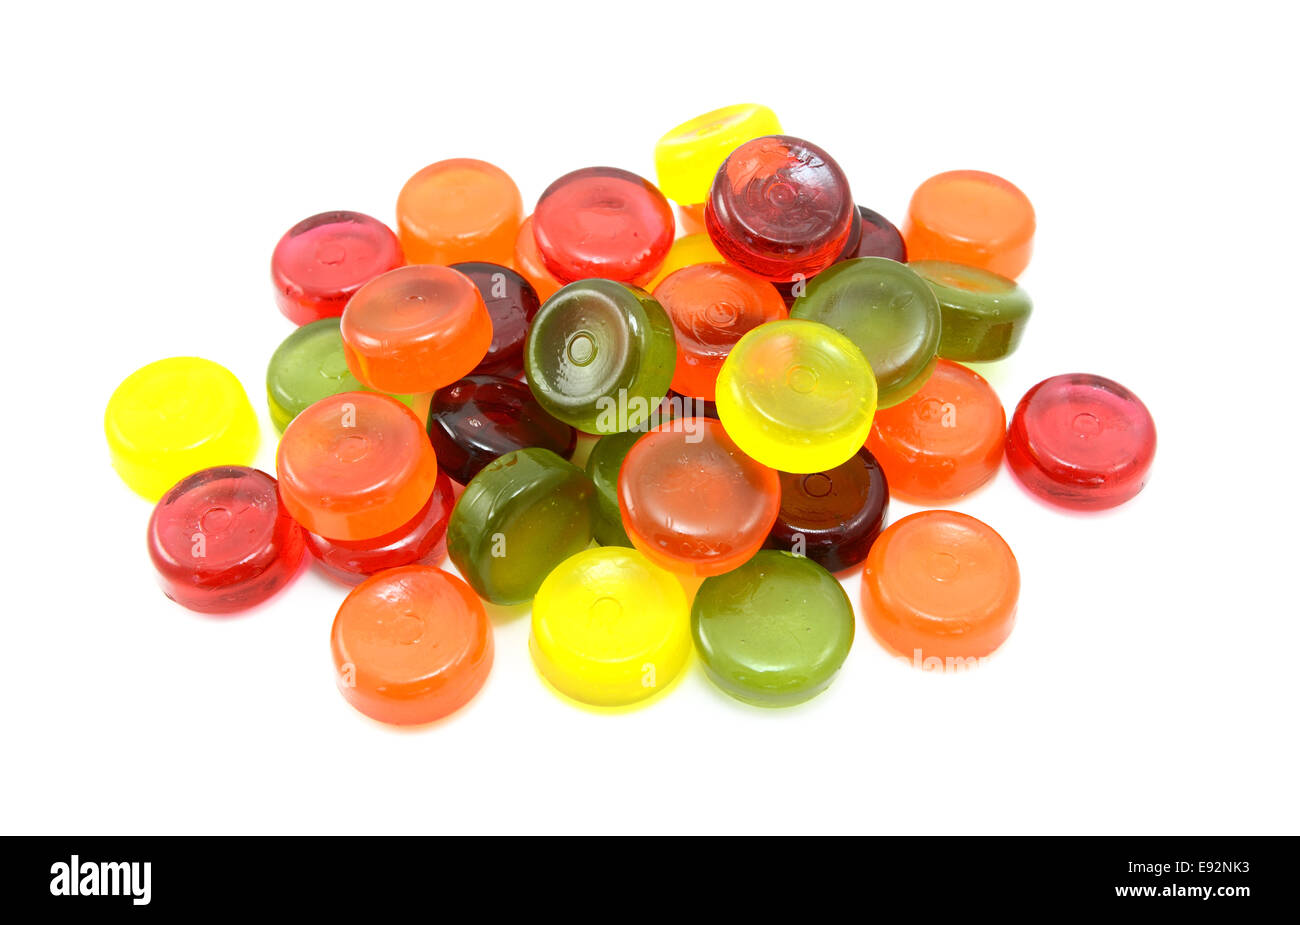 Pile of multi-coloured boiled sweets or hard candies Stock Photo